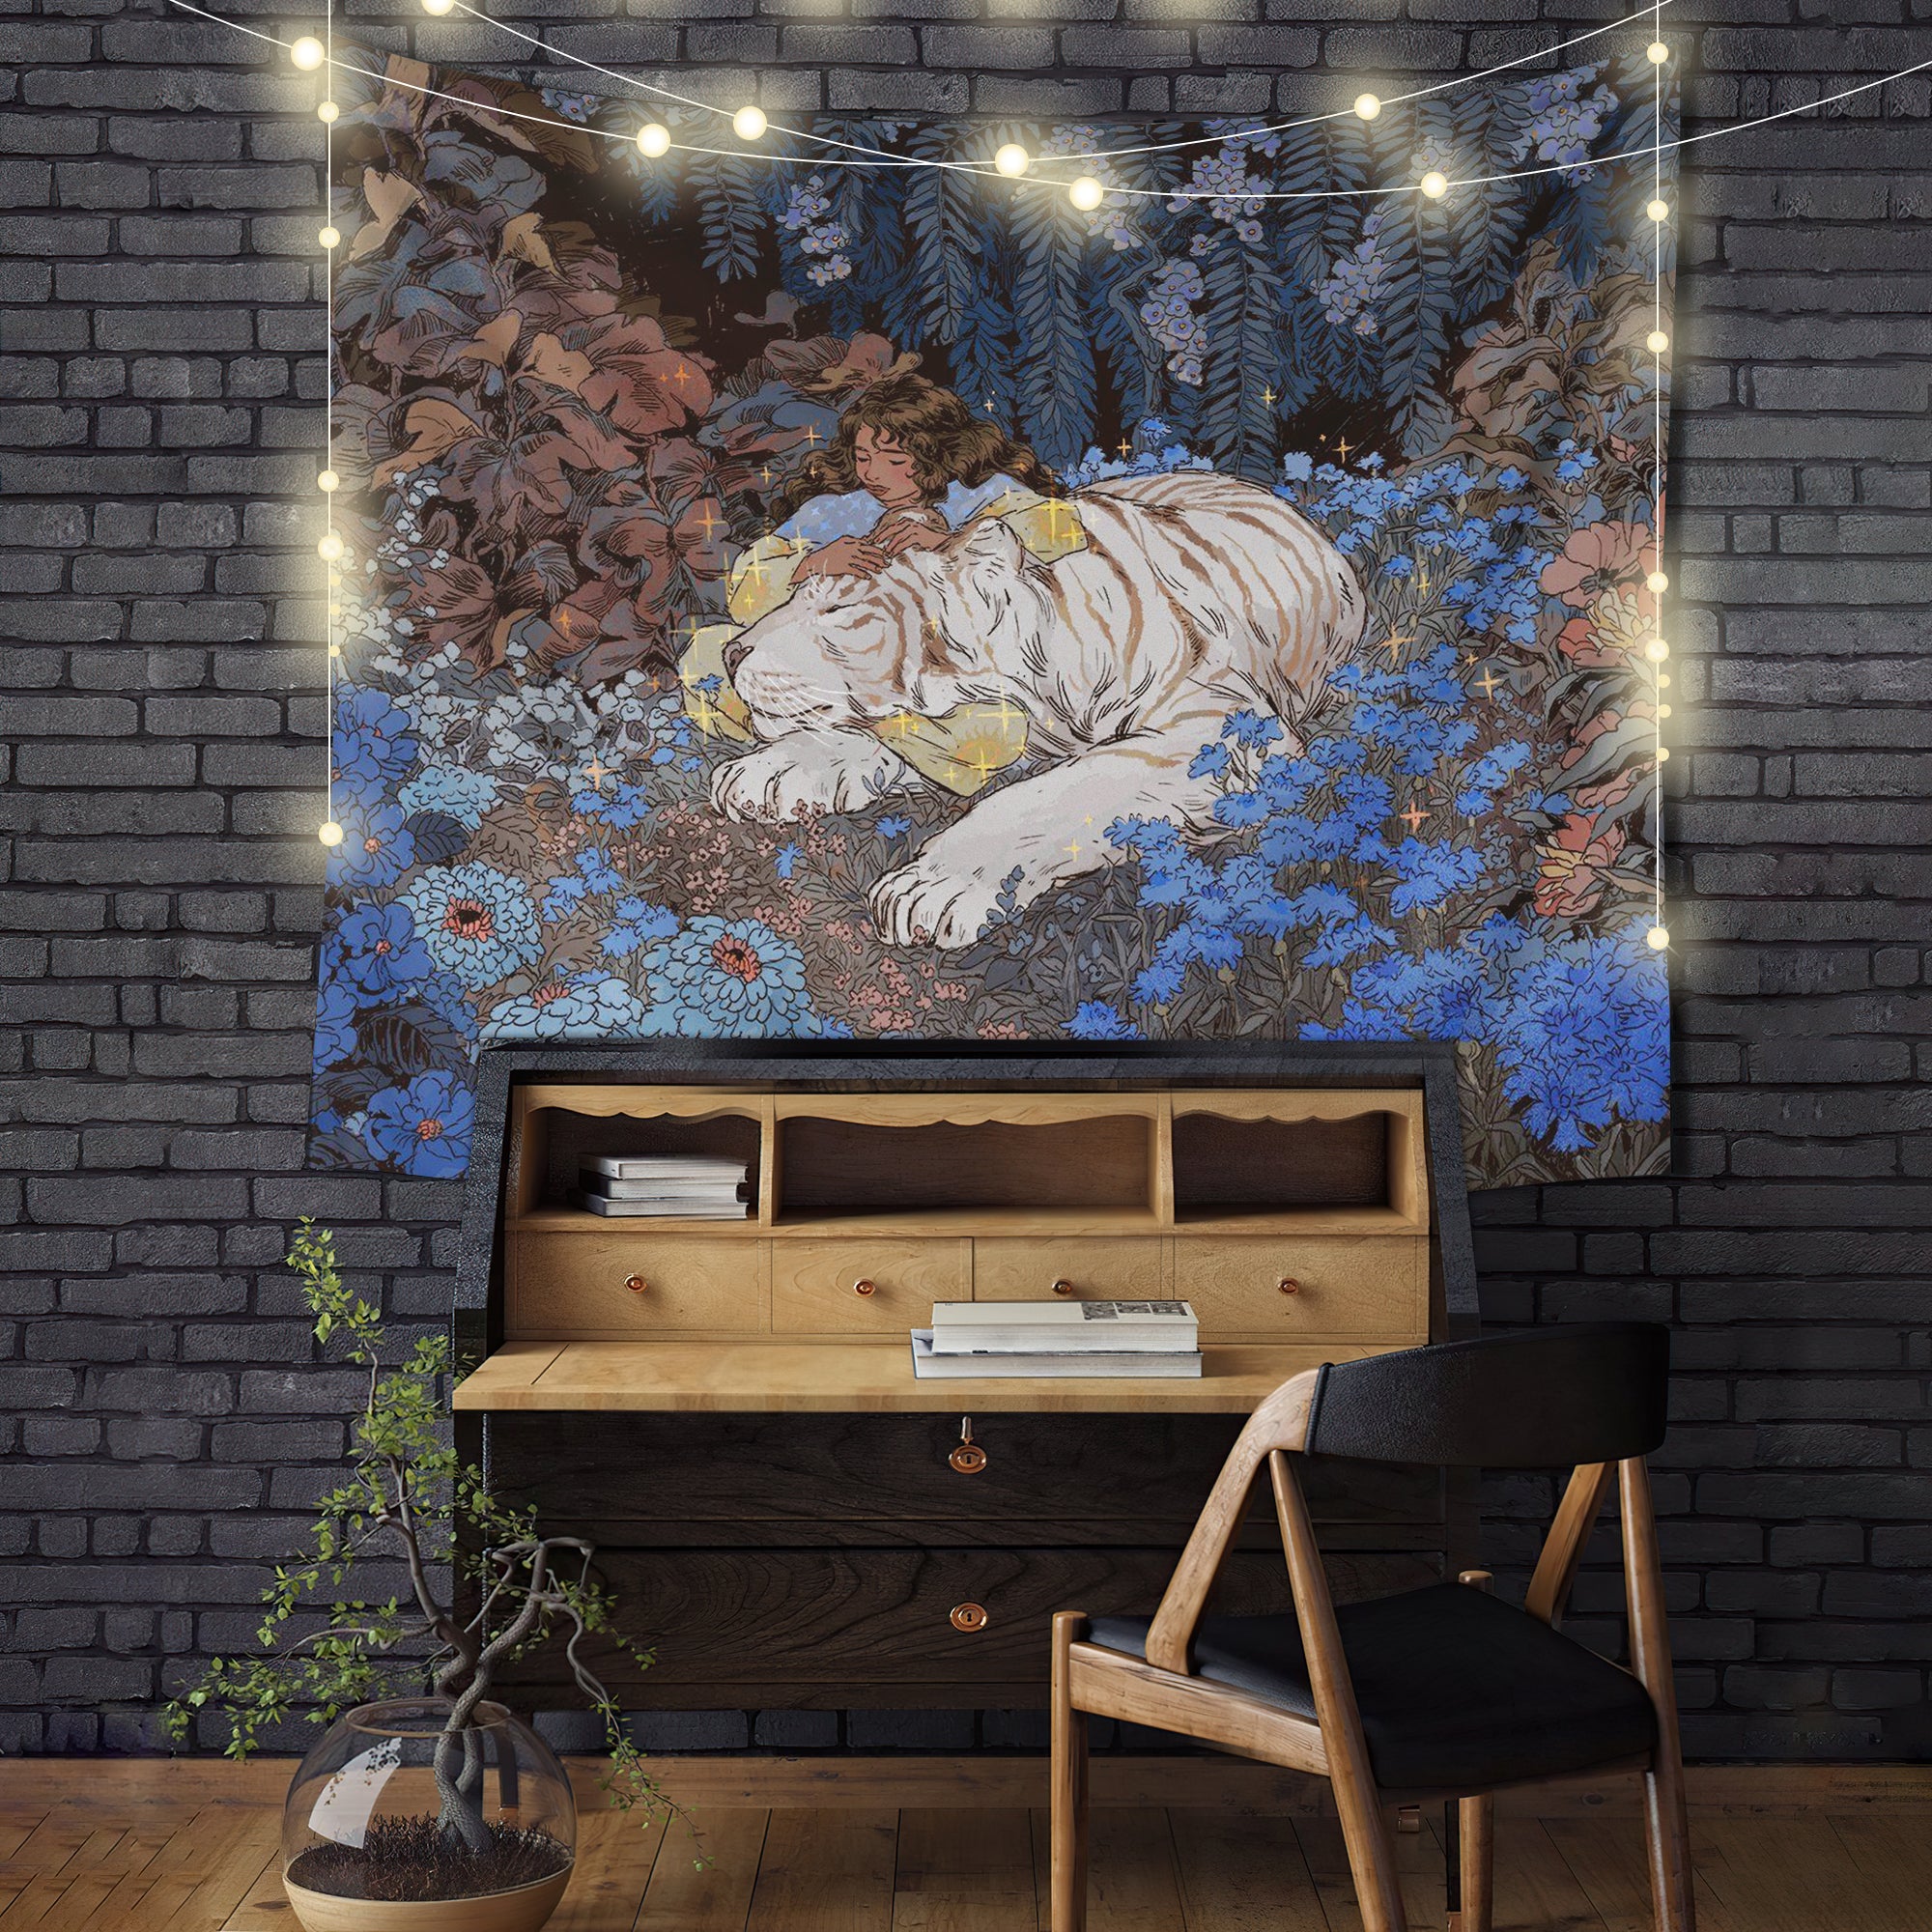 Girl With Tiger Tapestry Room Decor Nearkii